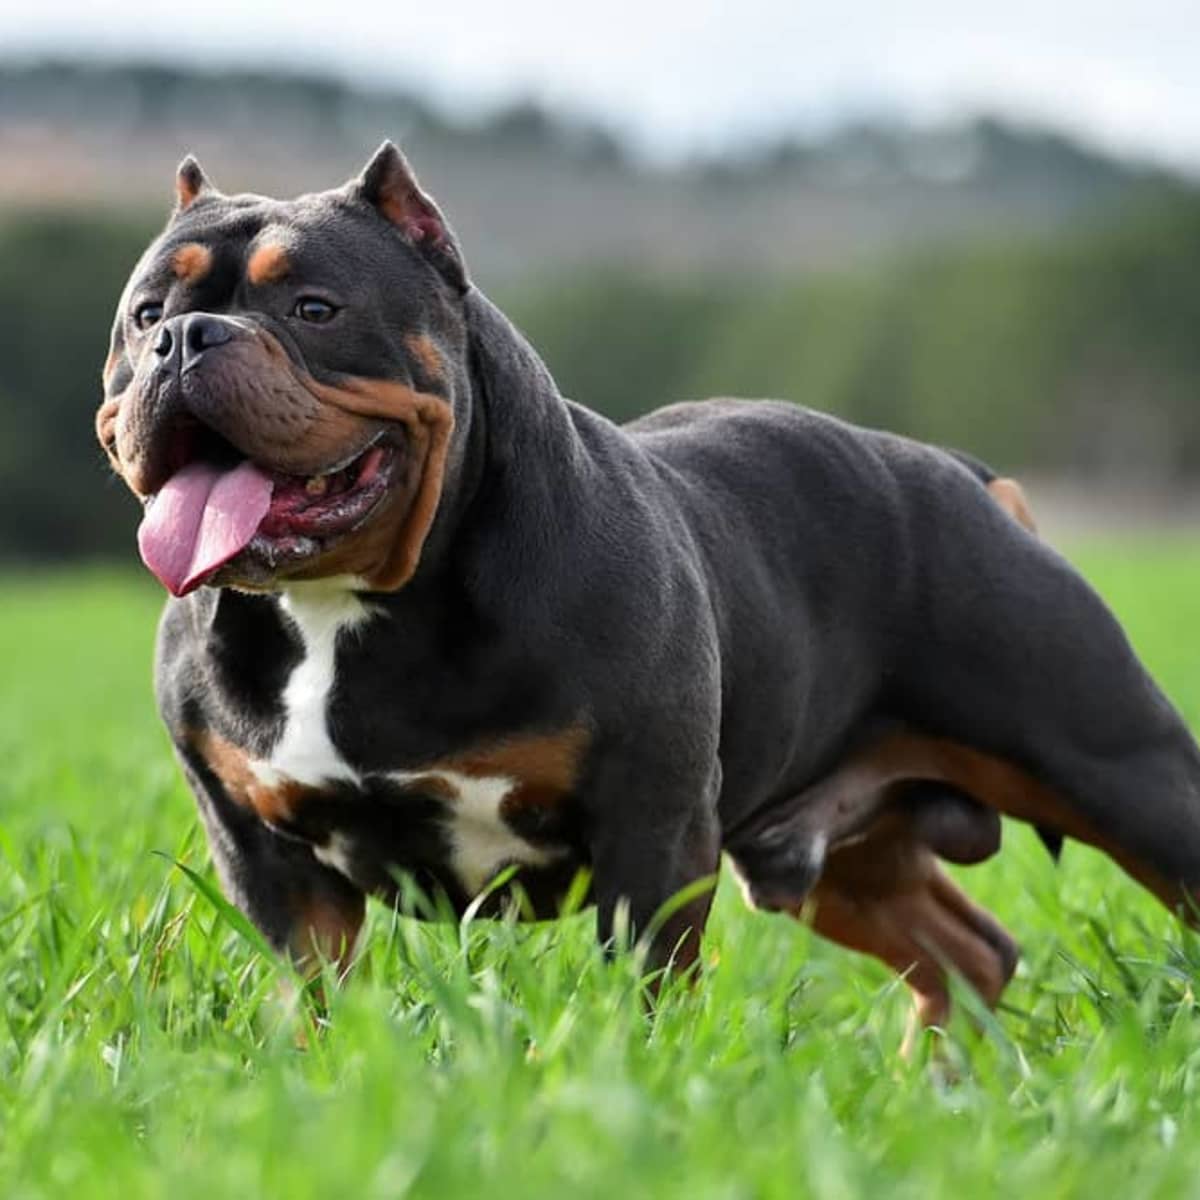 American Bully: Dog Breed History, Characteristics and More - HubPages